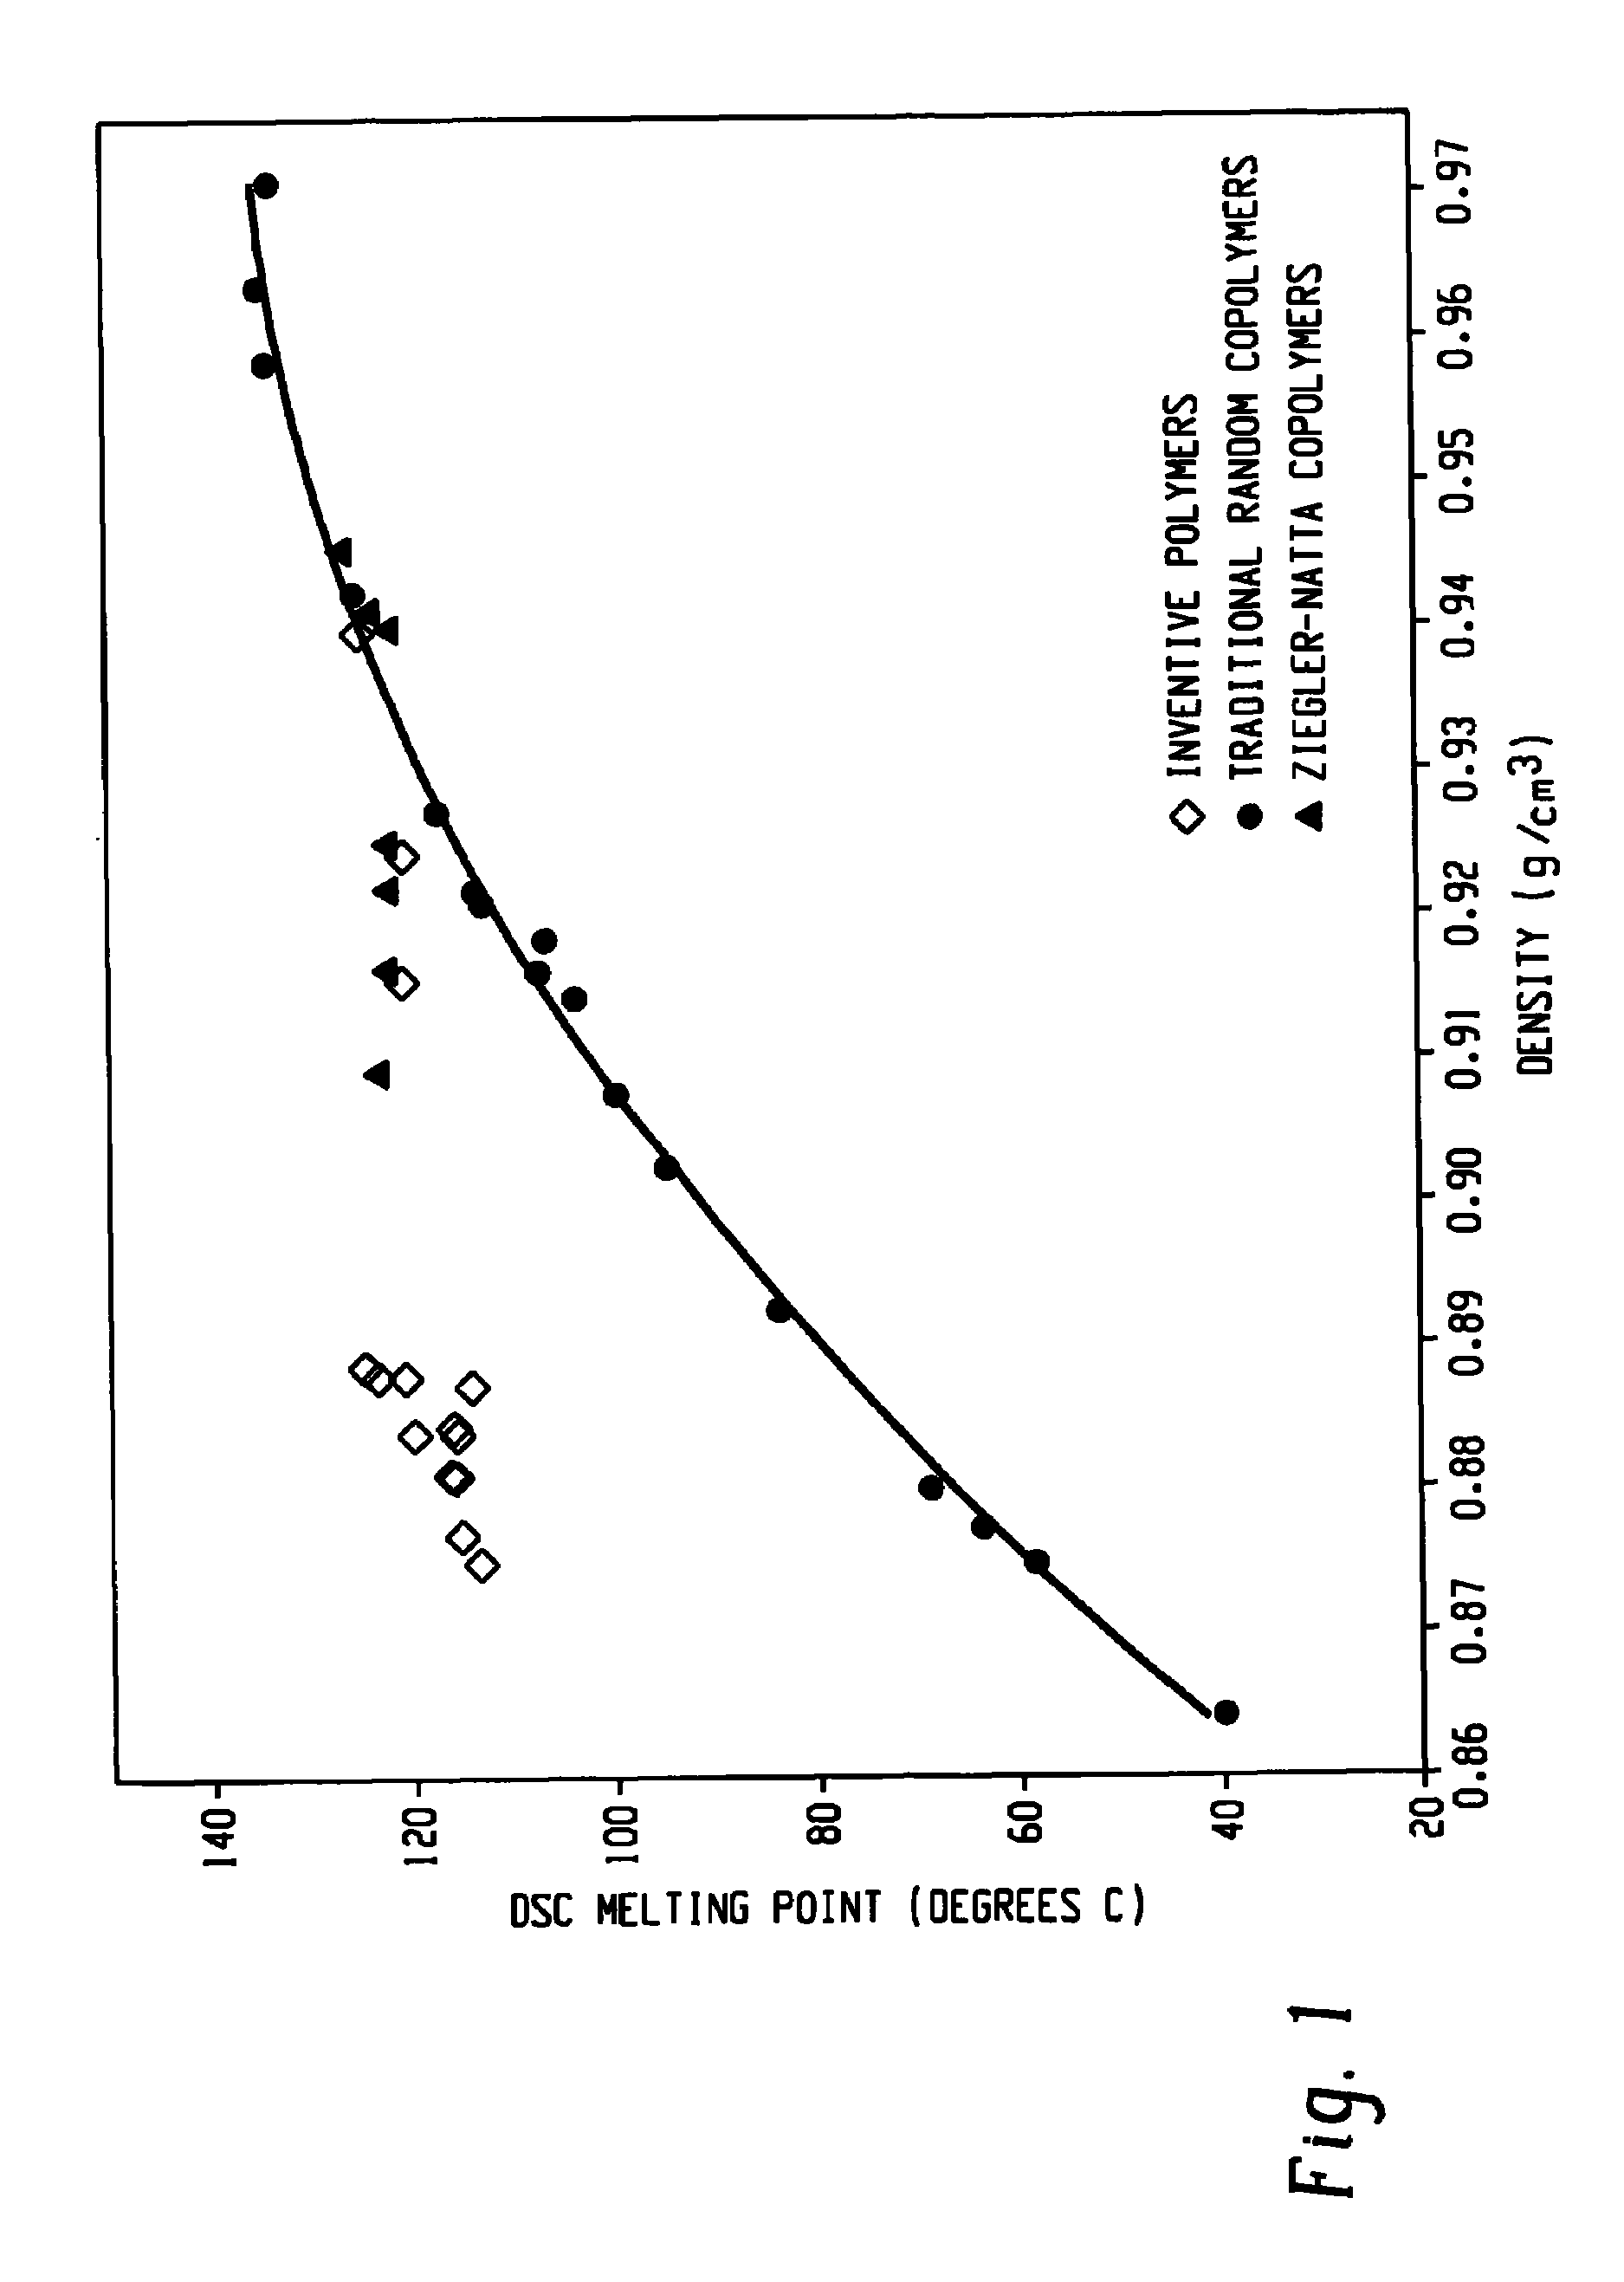 Filled polymer compositions made from interpolymers of ethylene/α-olefins and uses thereof